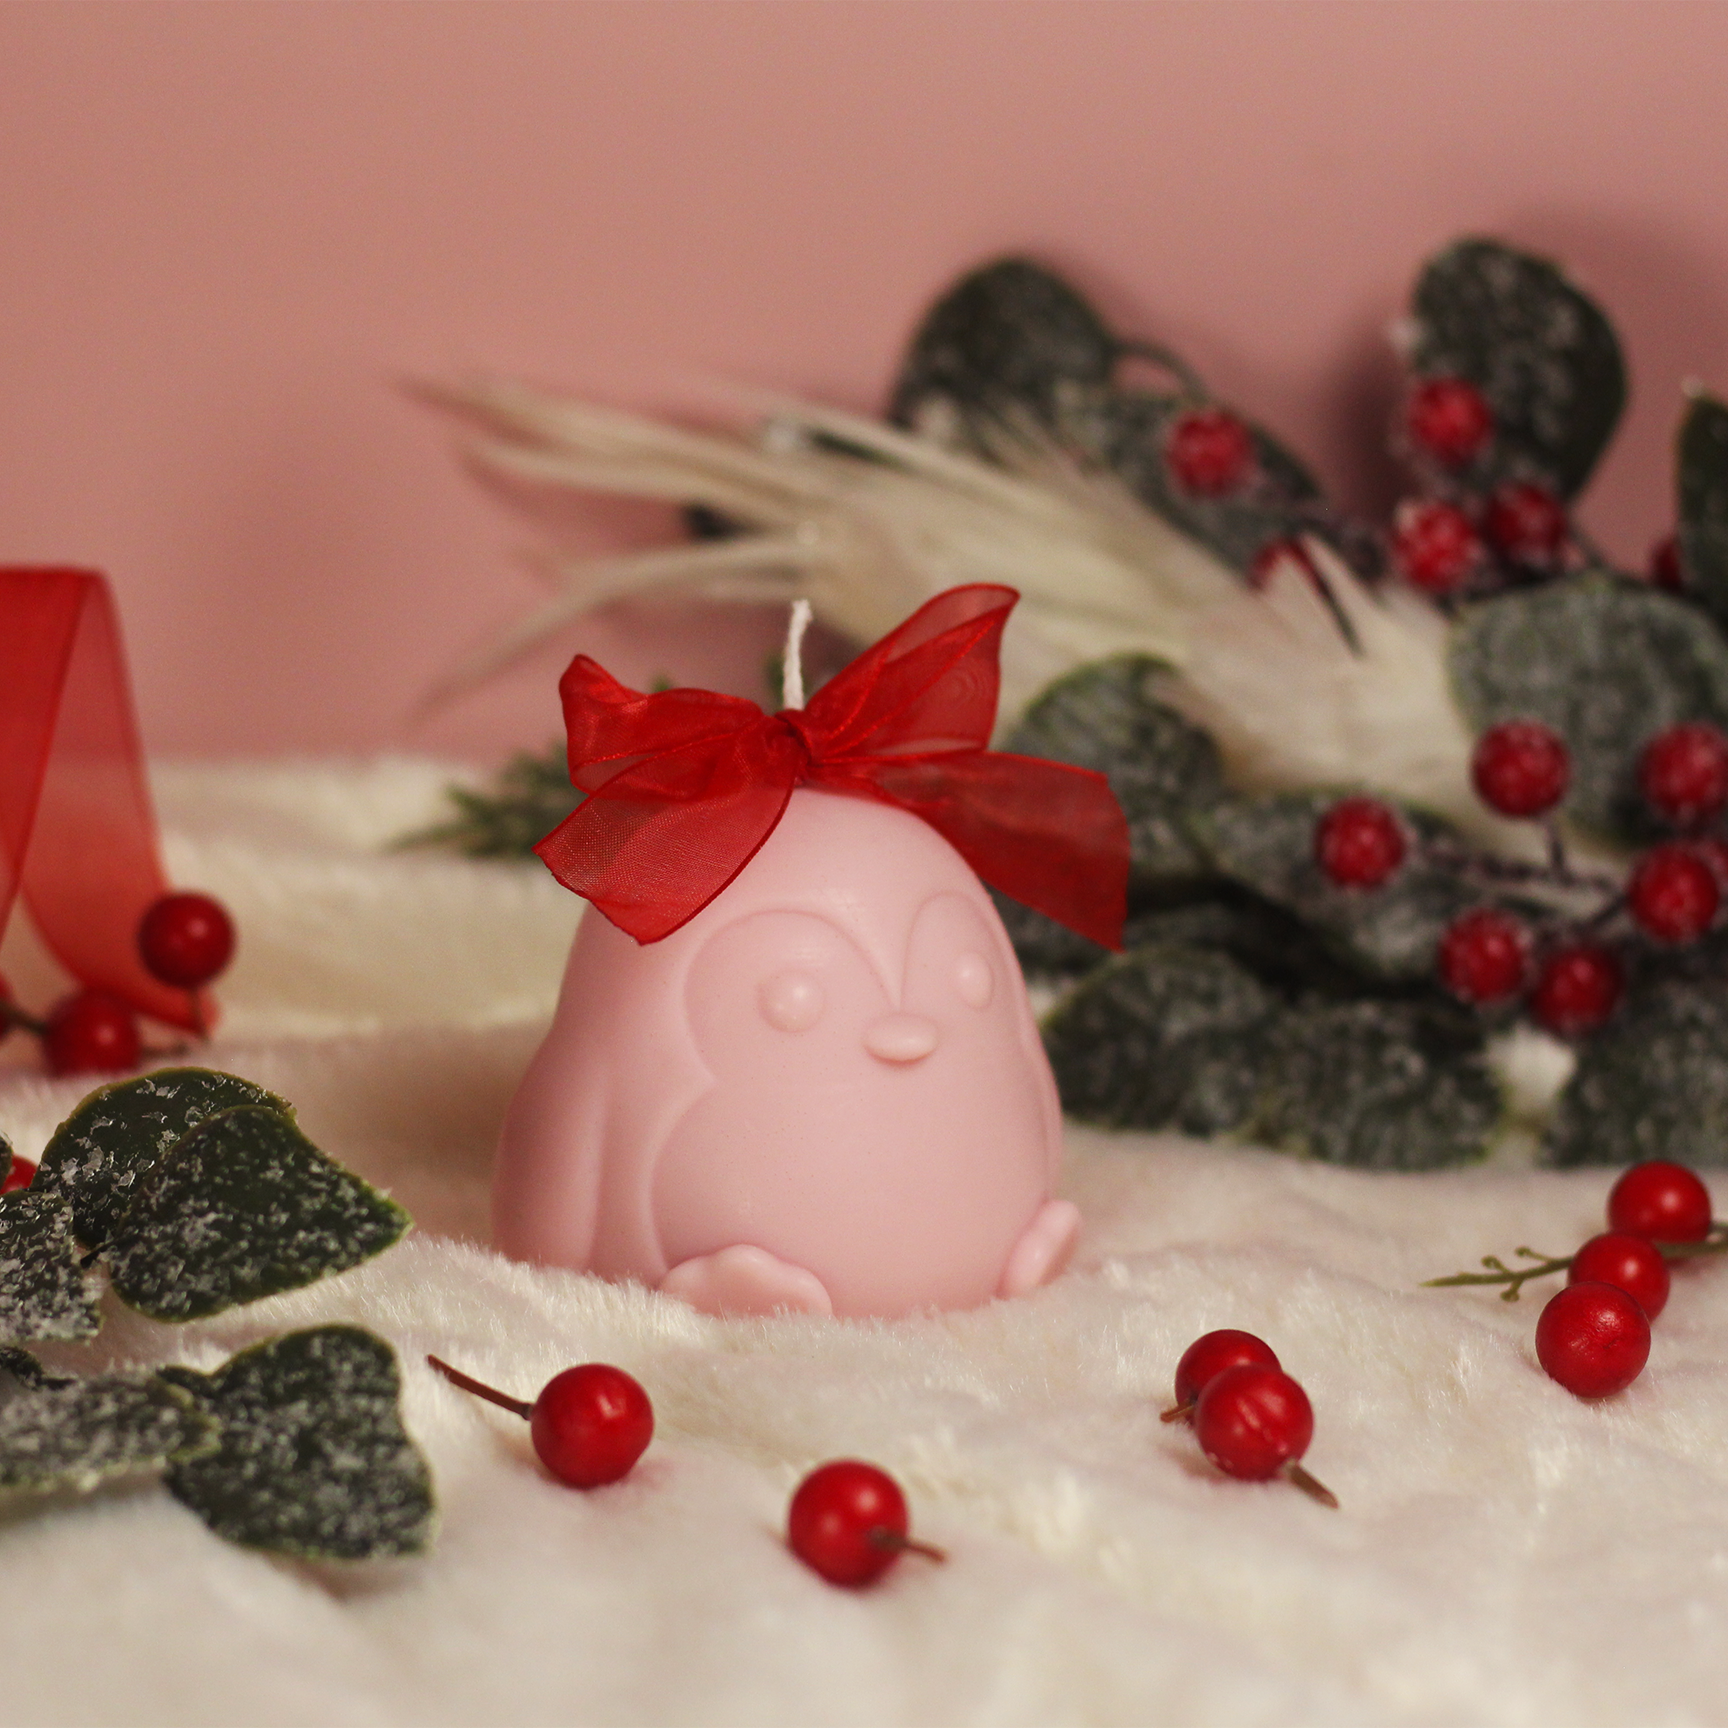 Berries Penguin Candle - Frolic Creations - Candle - Cute Self Care - Kawaii Atheistic - Quirky Gift - Gift For Her